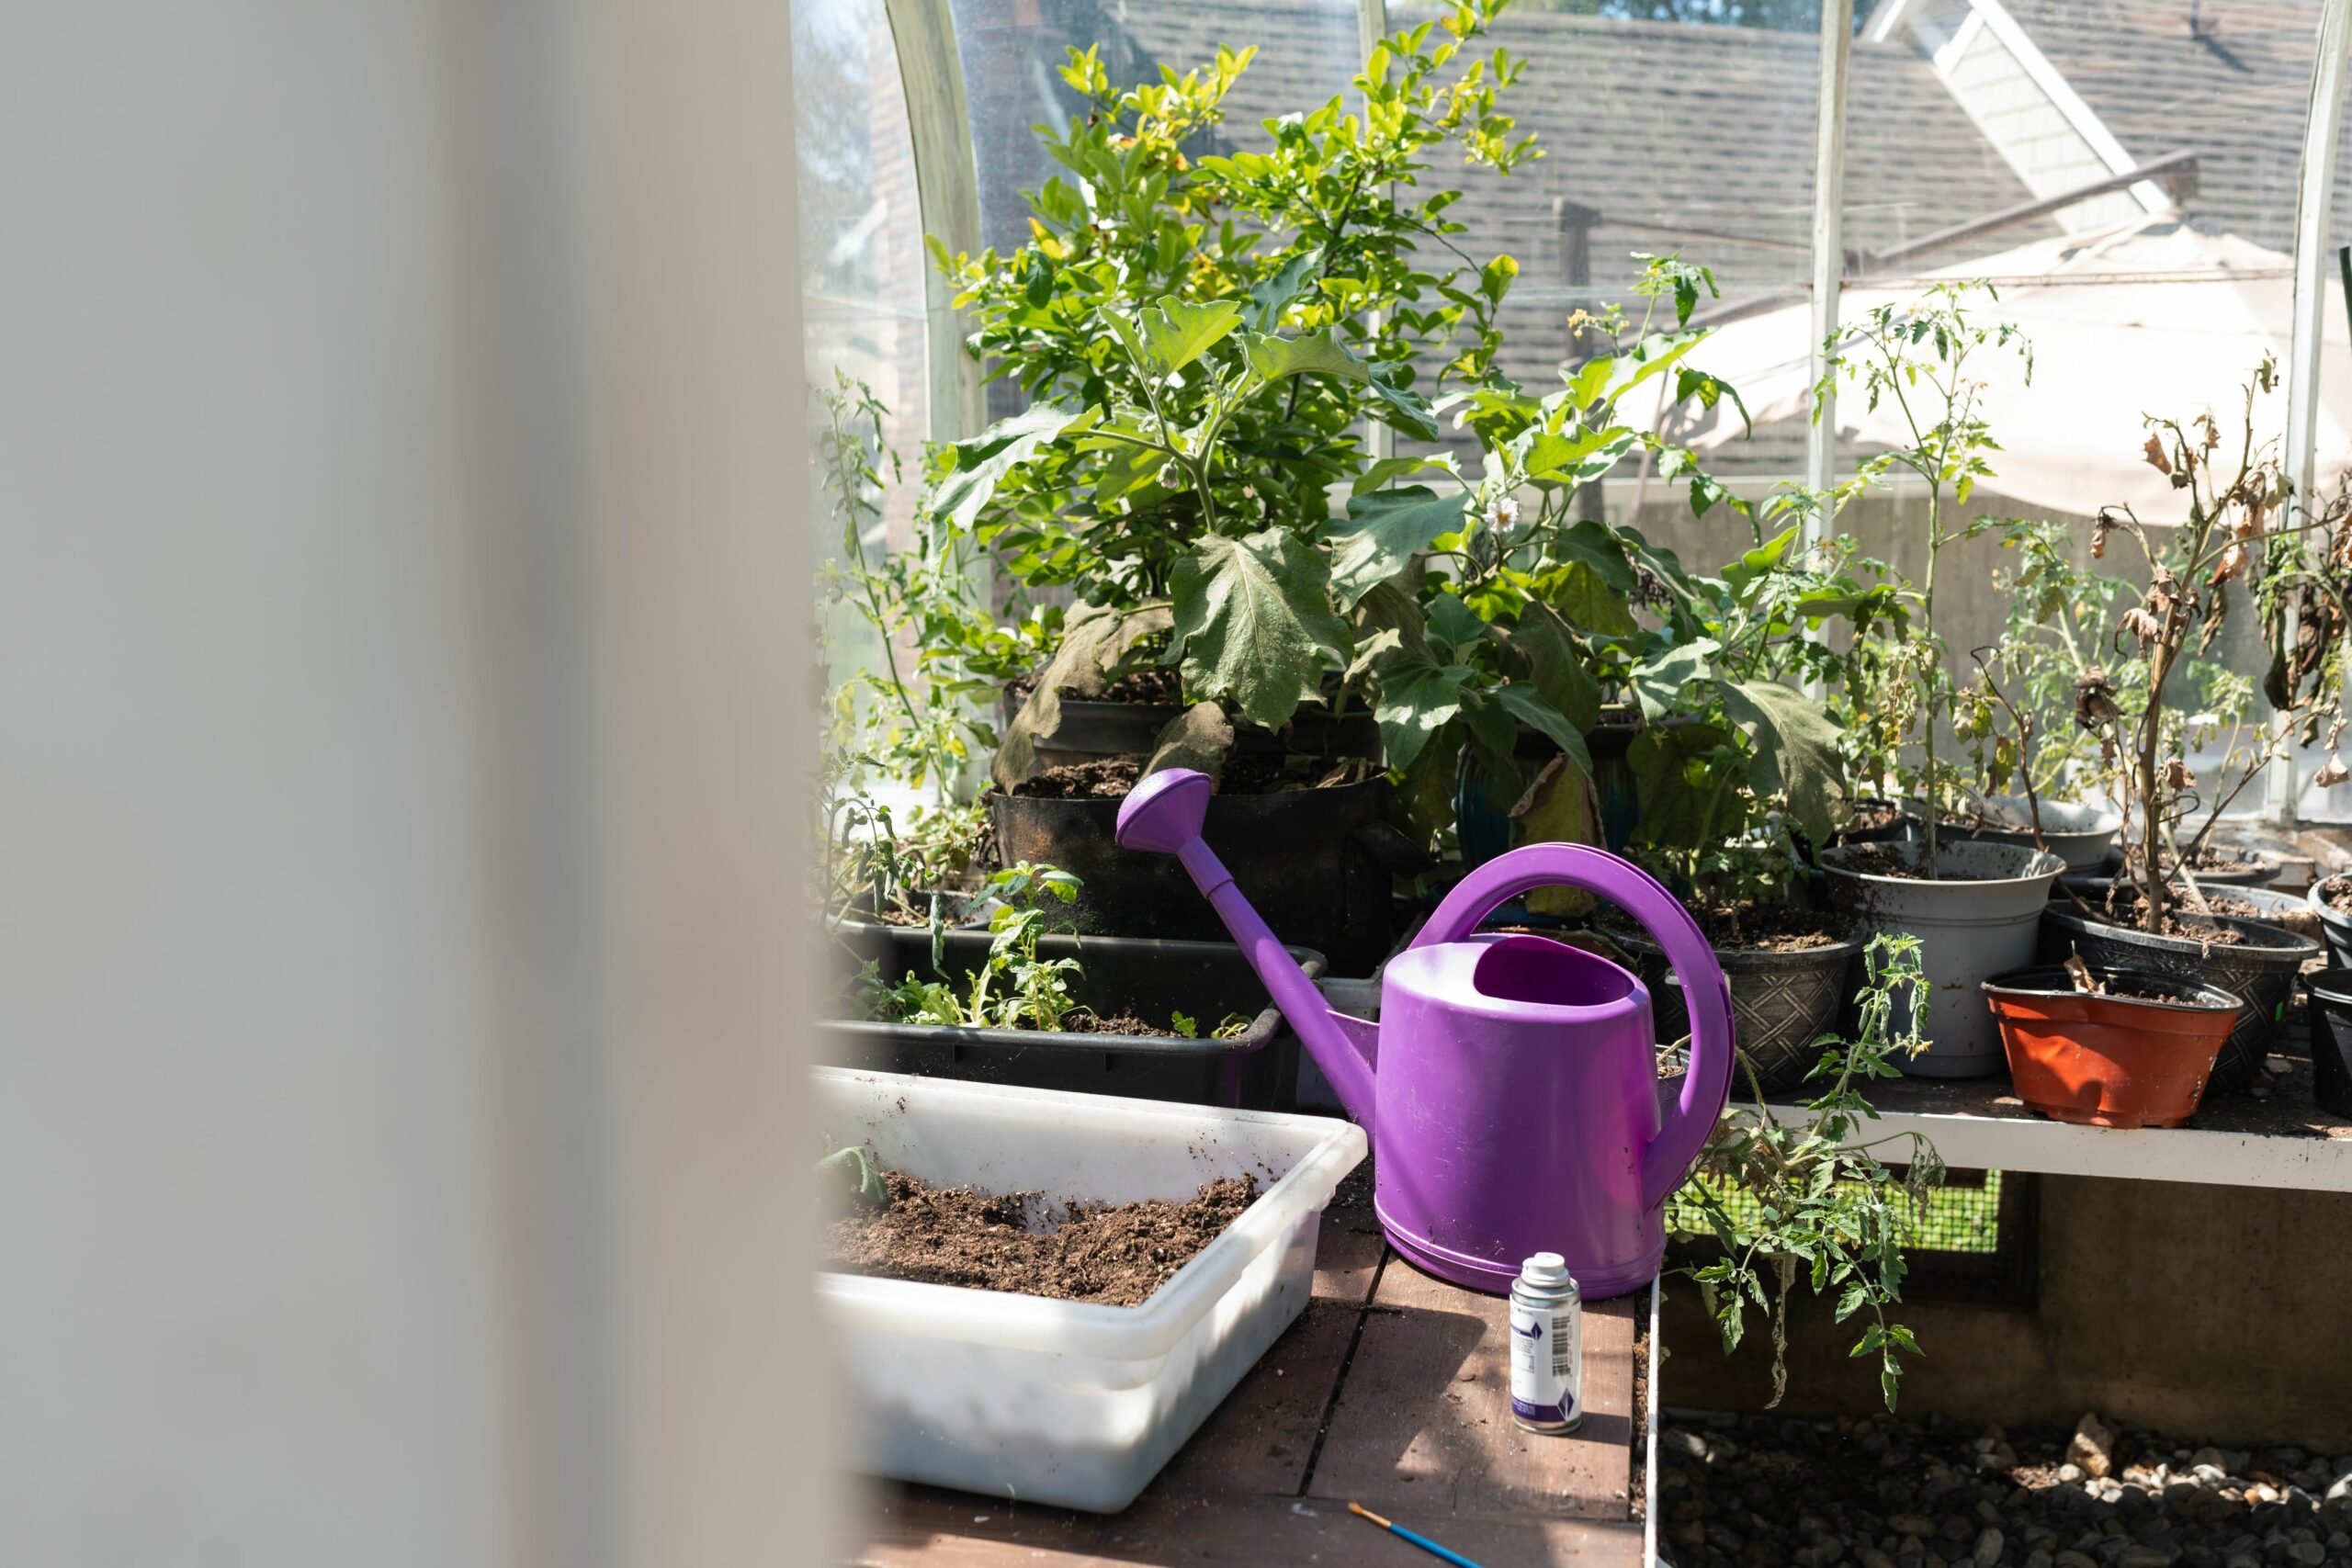 purple watering can and plants | Hidden River residential eating disorder treatment center